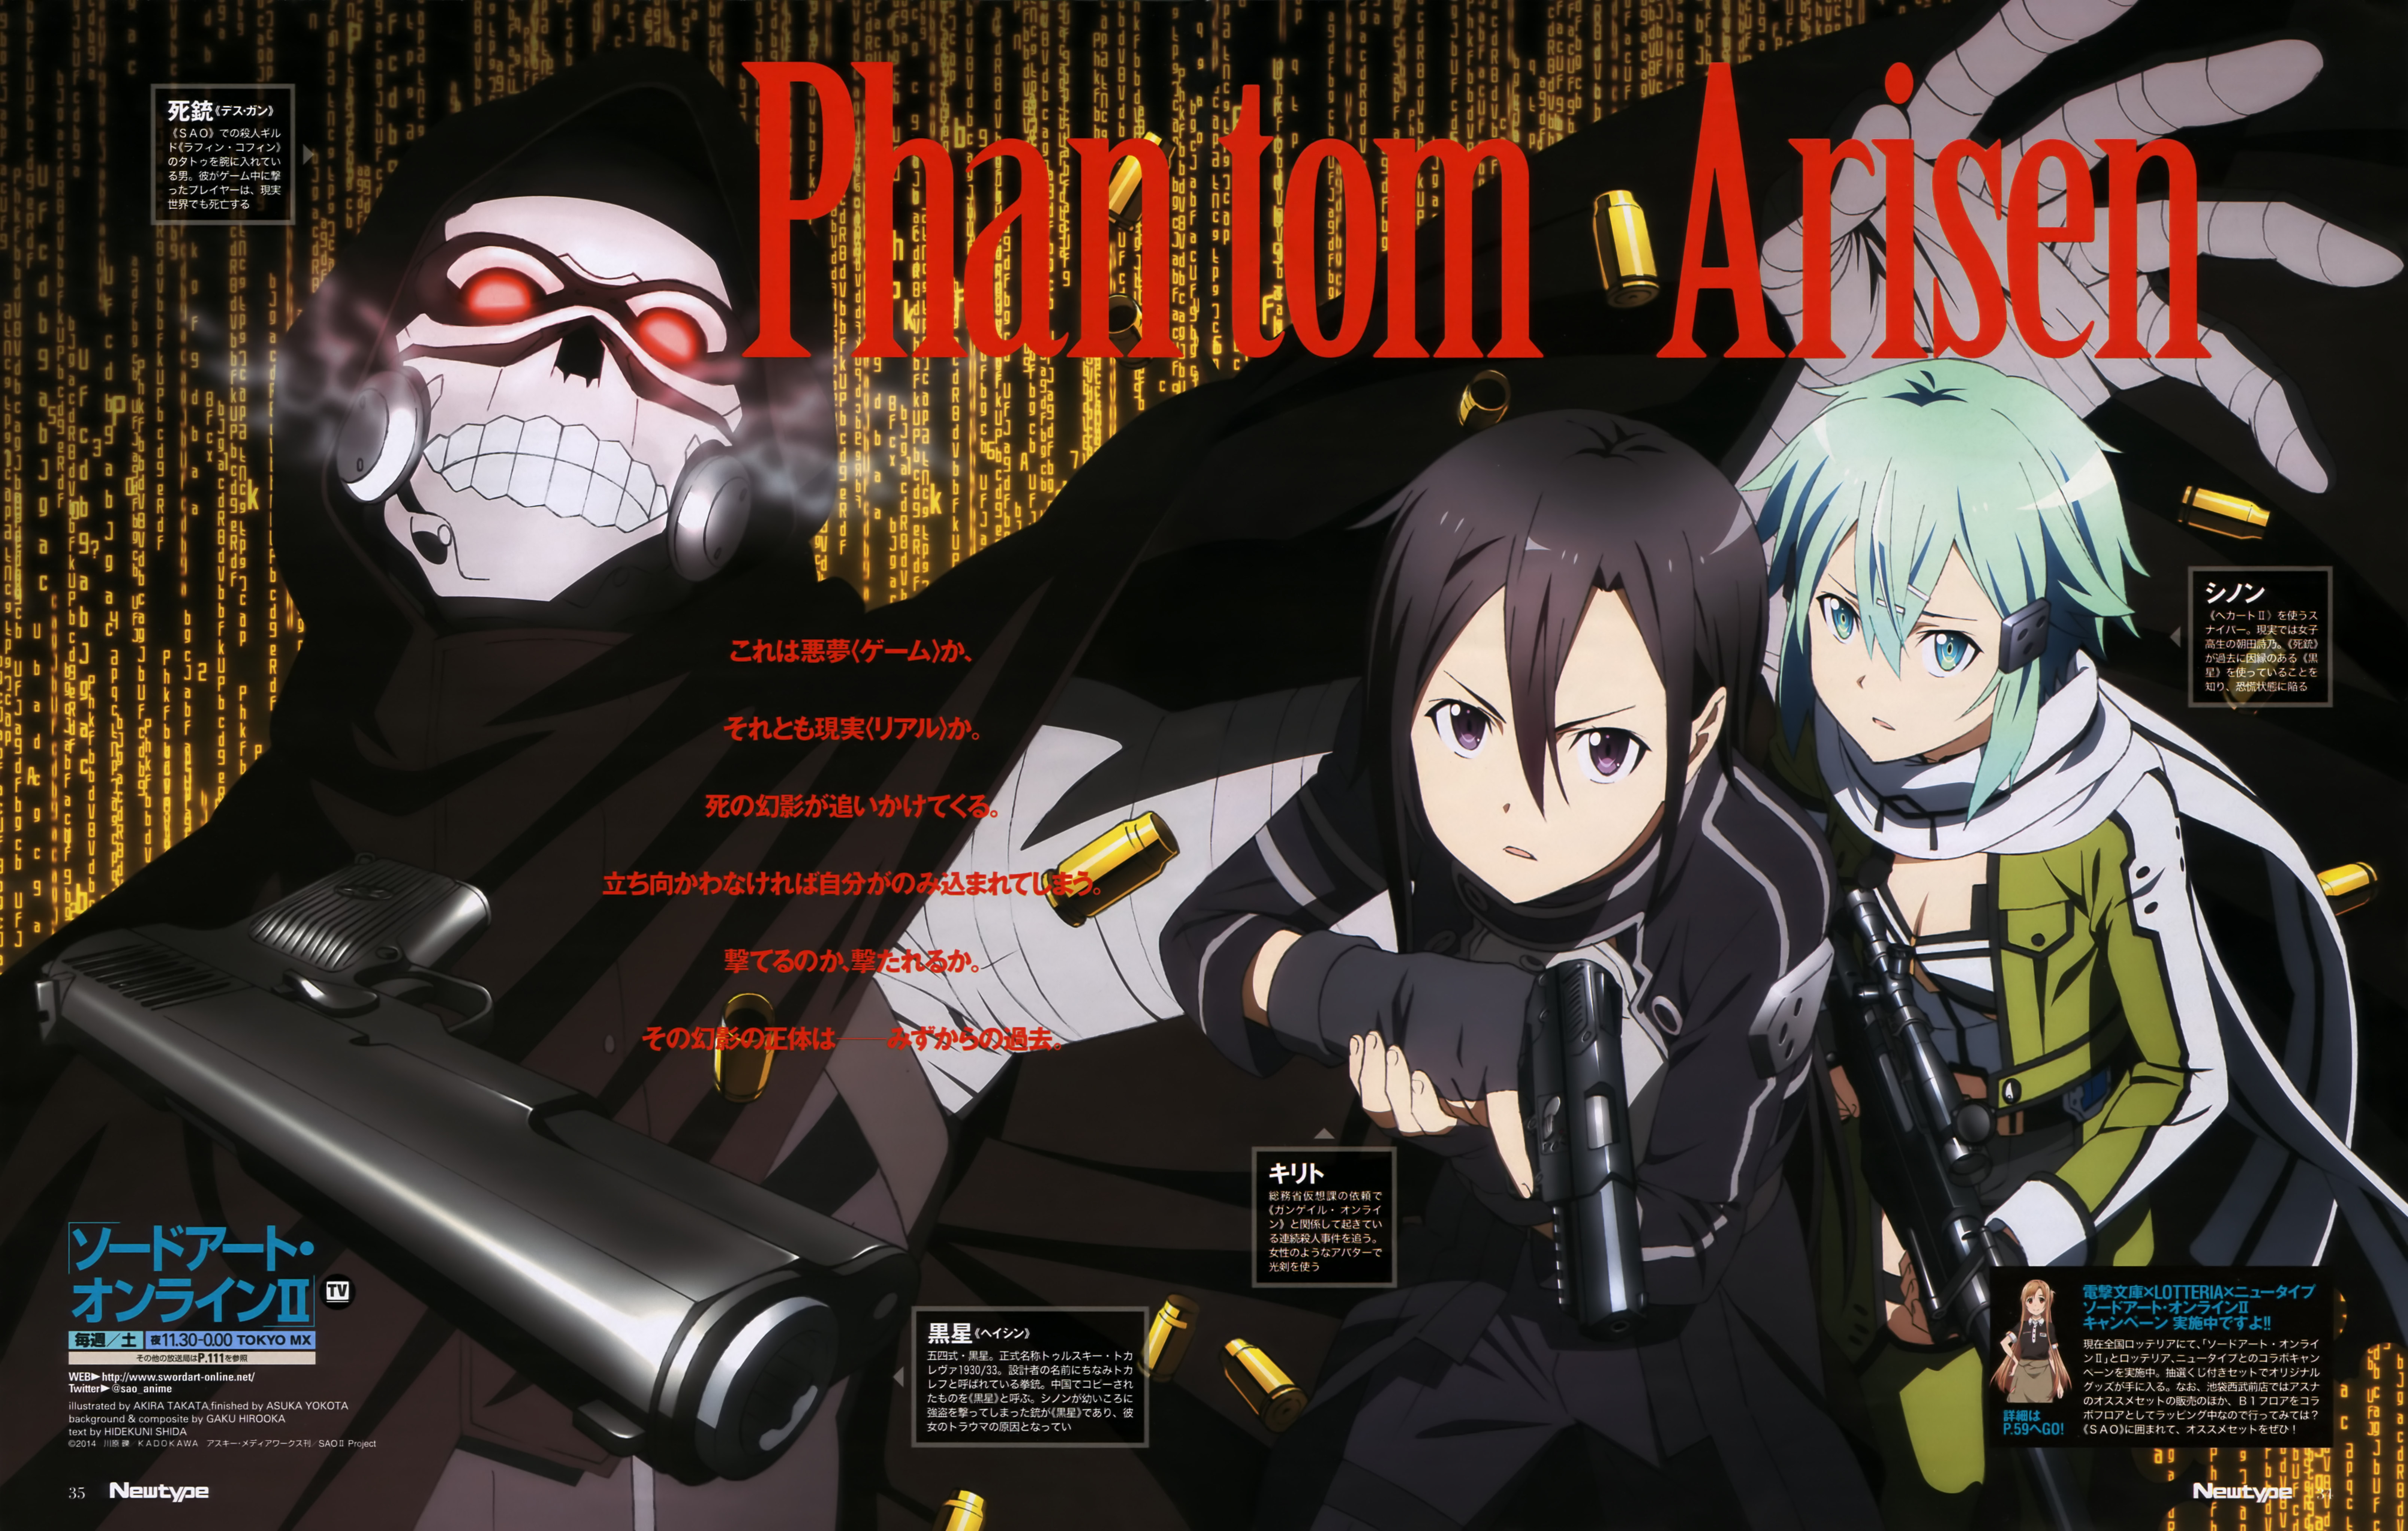 Top 10 Best Anime Series from 2014 According to Animeanime haruhichan.com sword art online 2